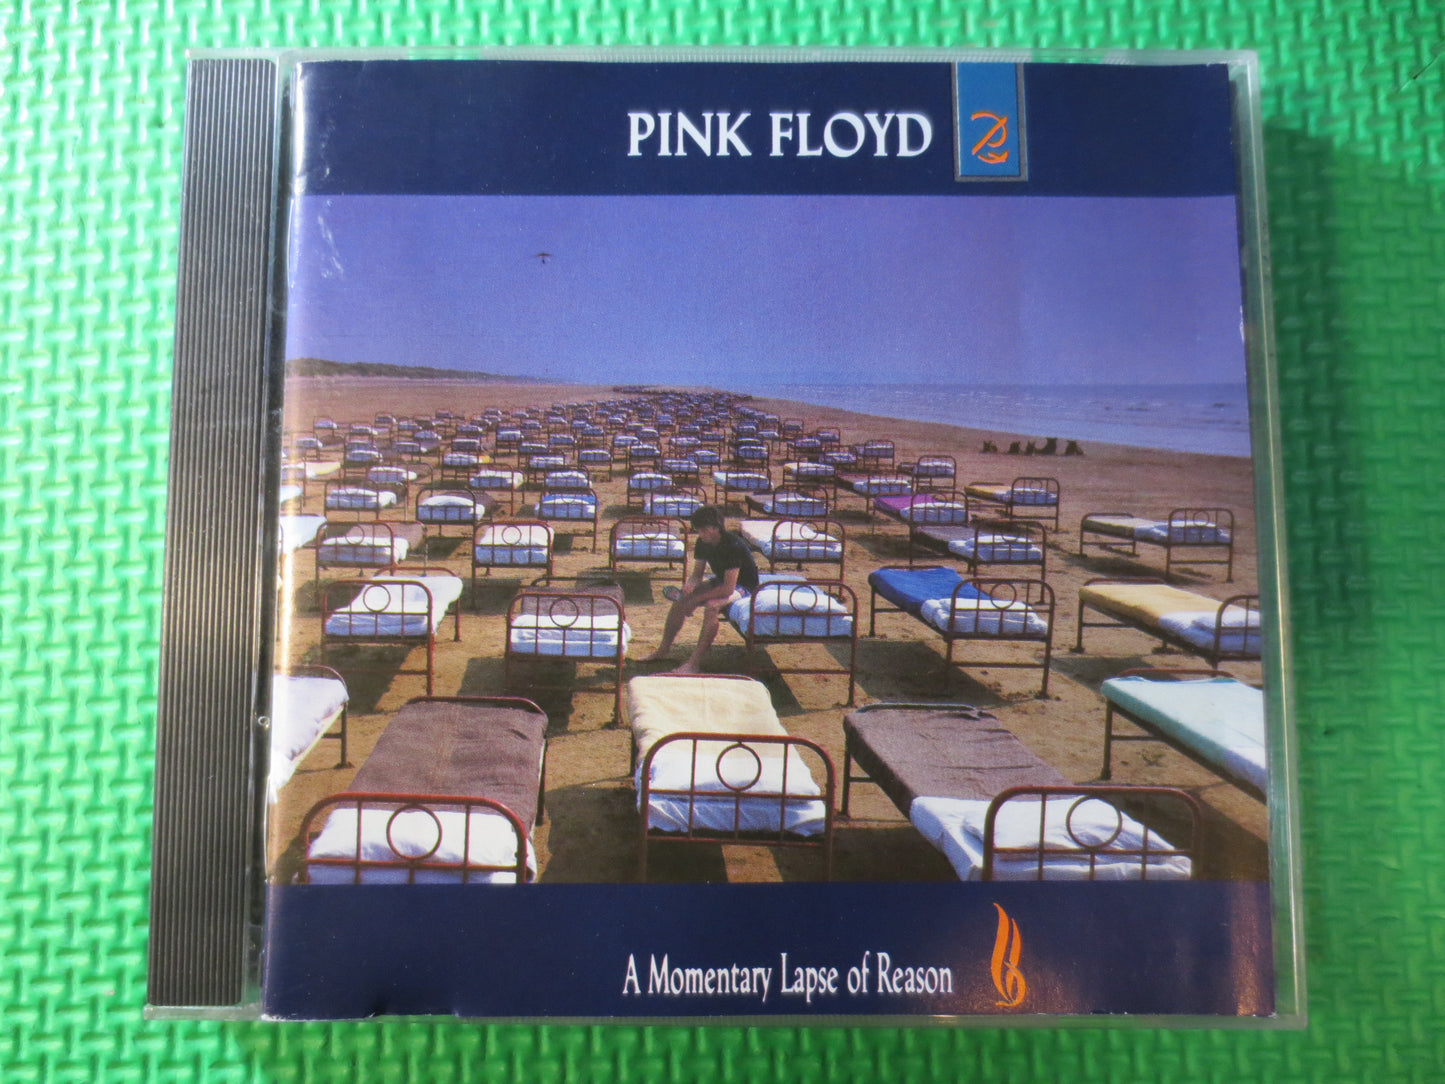 Vintage Cd's, PINK FLOYD, ANIMALS, Pink Floyd Cd, Pink Floyd Album, Pink  Floyd Music, Pink Floyd Song, Classic Rock Cd, 1986 Compact Discs 